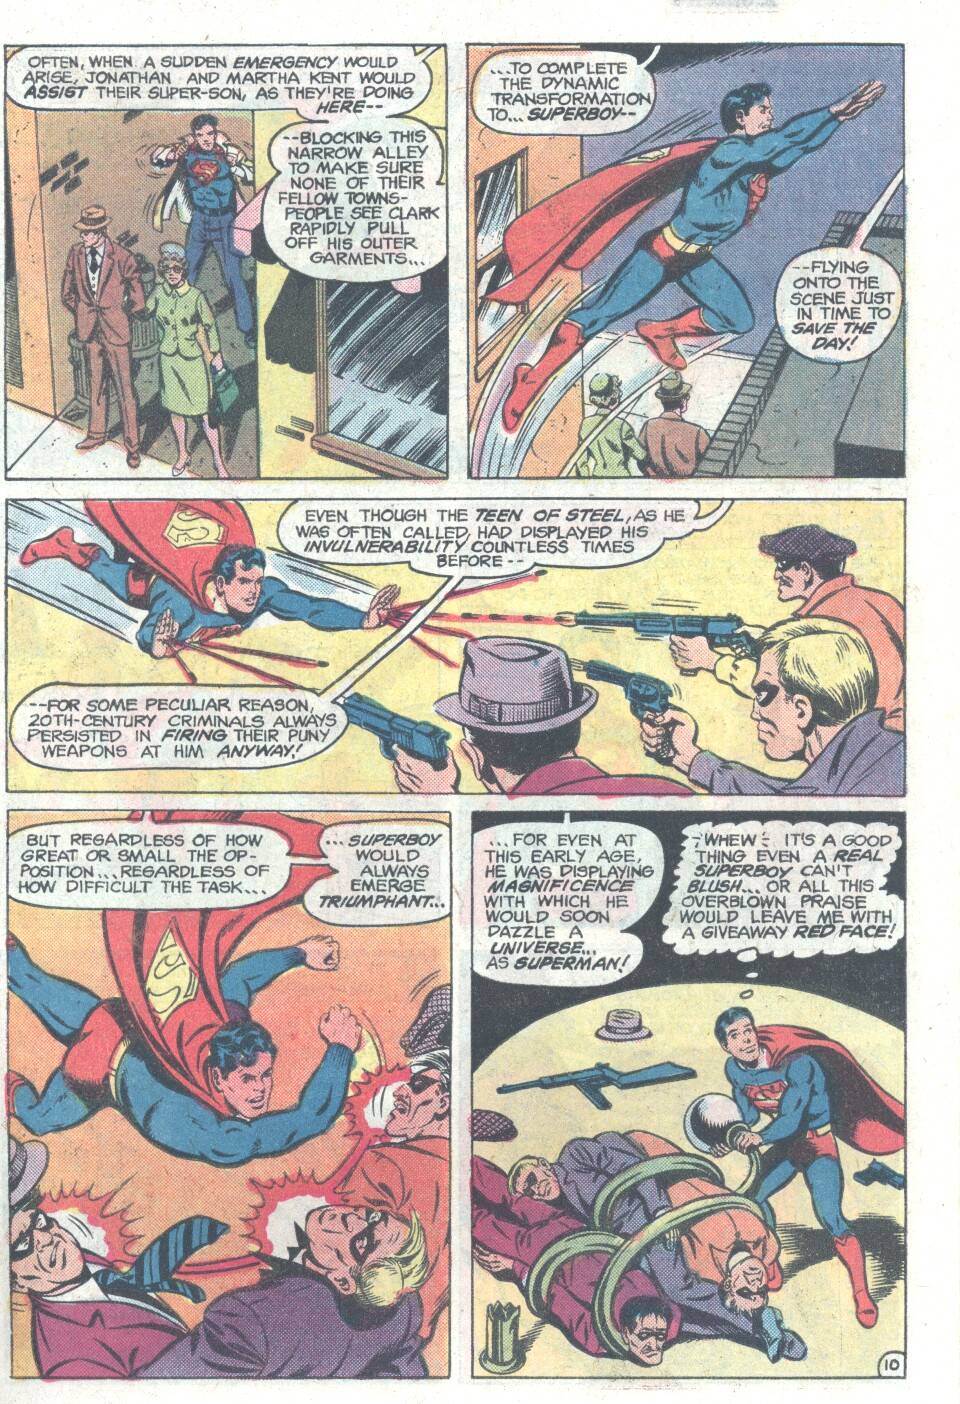 The New Adventures of Superboy 10 Page 10